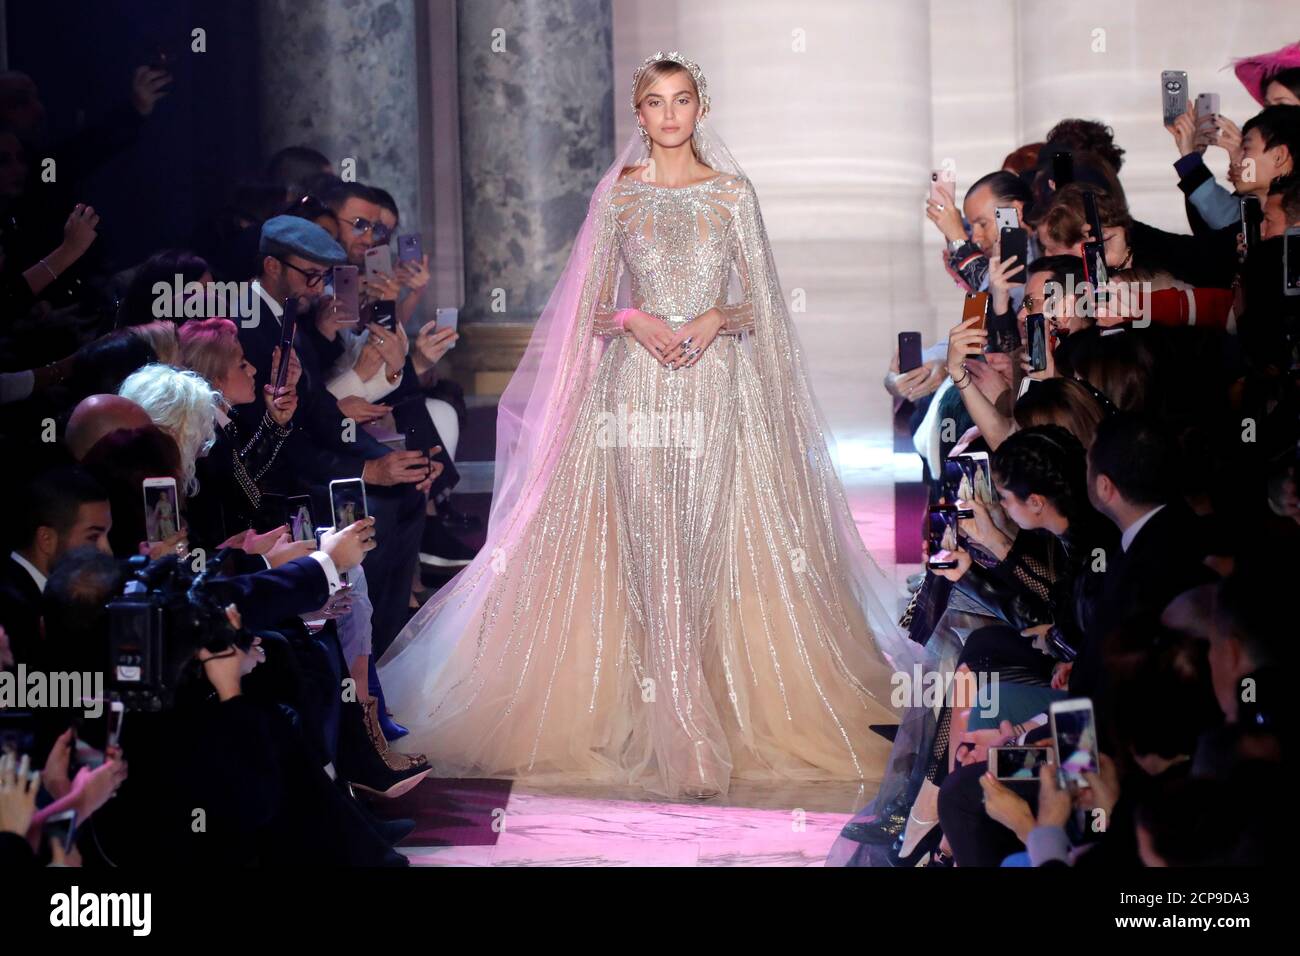 A model presents a wedding dress by designer Elie Saab as part of his Haute Couture  Spring-Summer 2018 fashion show in Paris, France, January 24, 2018.  REUTERS/Charles Platiau Stock Photo - Alamy